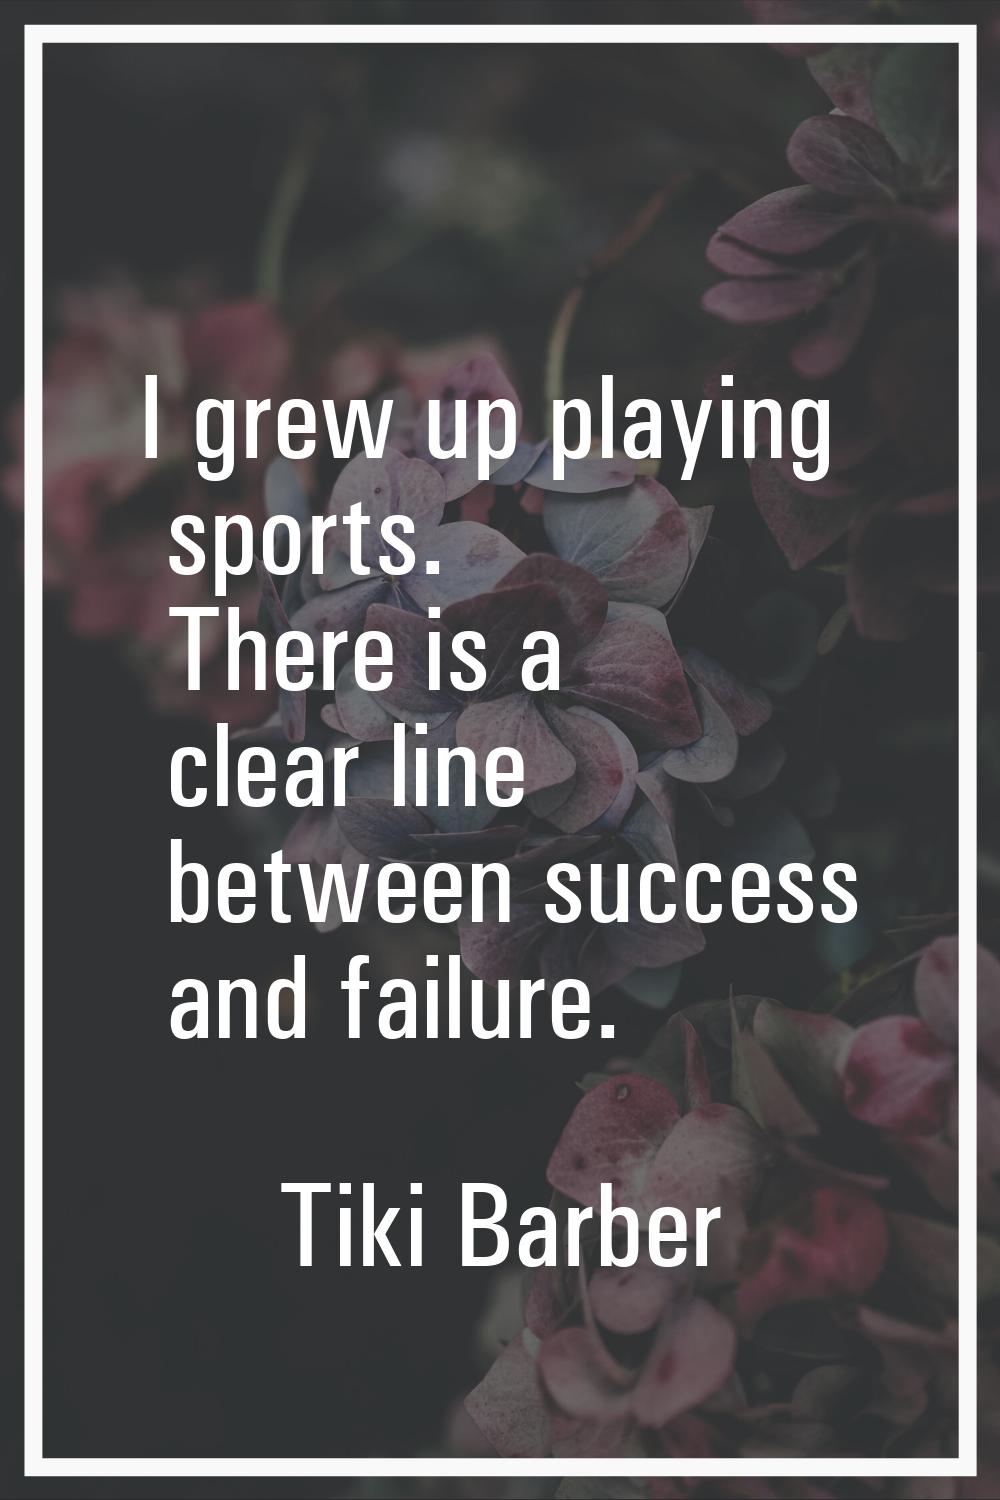 I grew up playing sports. There is a clear line between success and failure.